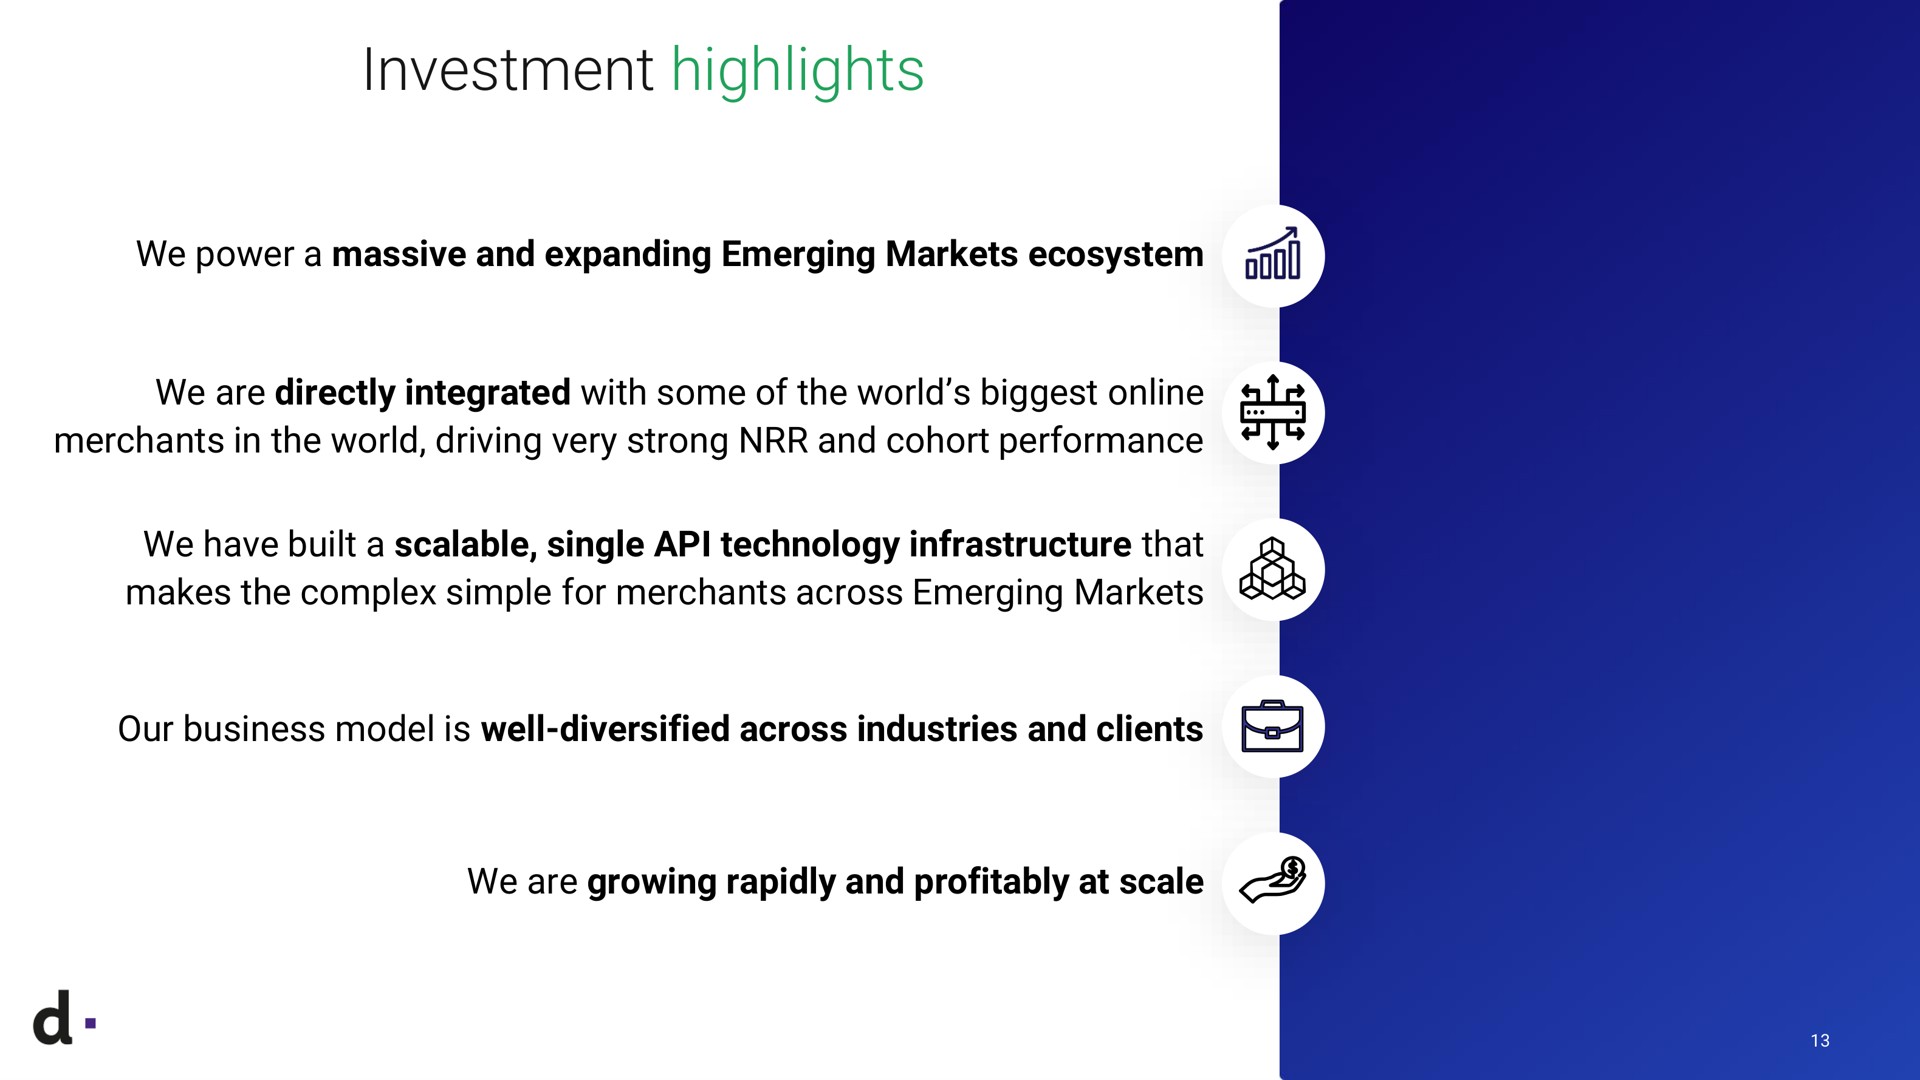 investment highlights we power a massive and expanding emerging markets ecosystem we are directly integrated with some of the world biggest merchants in the world driving very strong and cohort performance we have built a scalable single technology infrastructure that makes the complex simple for merchants across emerging markets our business model is well diversified across industries and clients we are growing rapidly and profitably at scale | dLocal